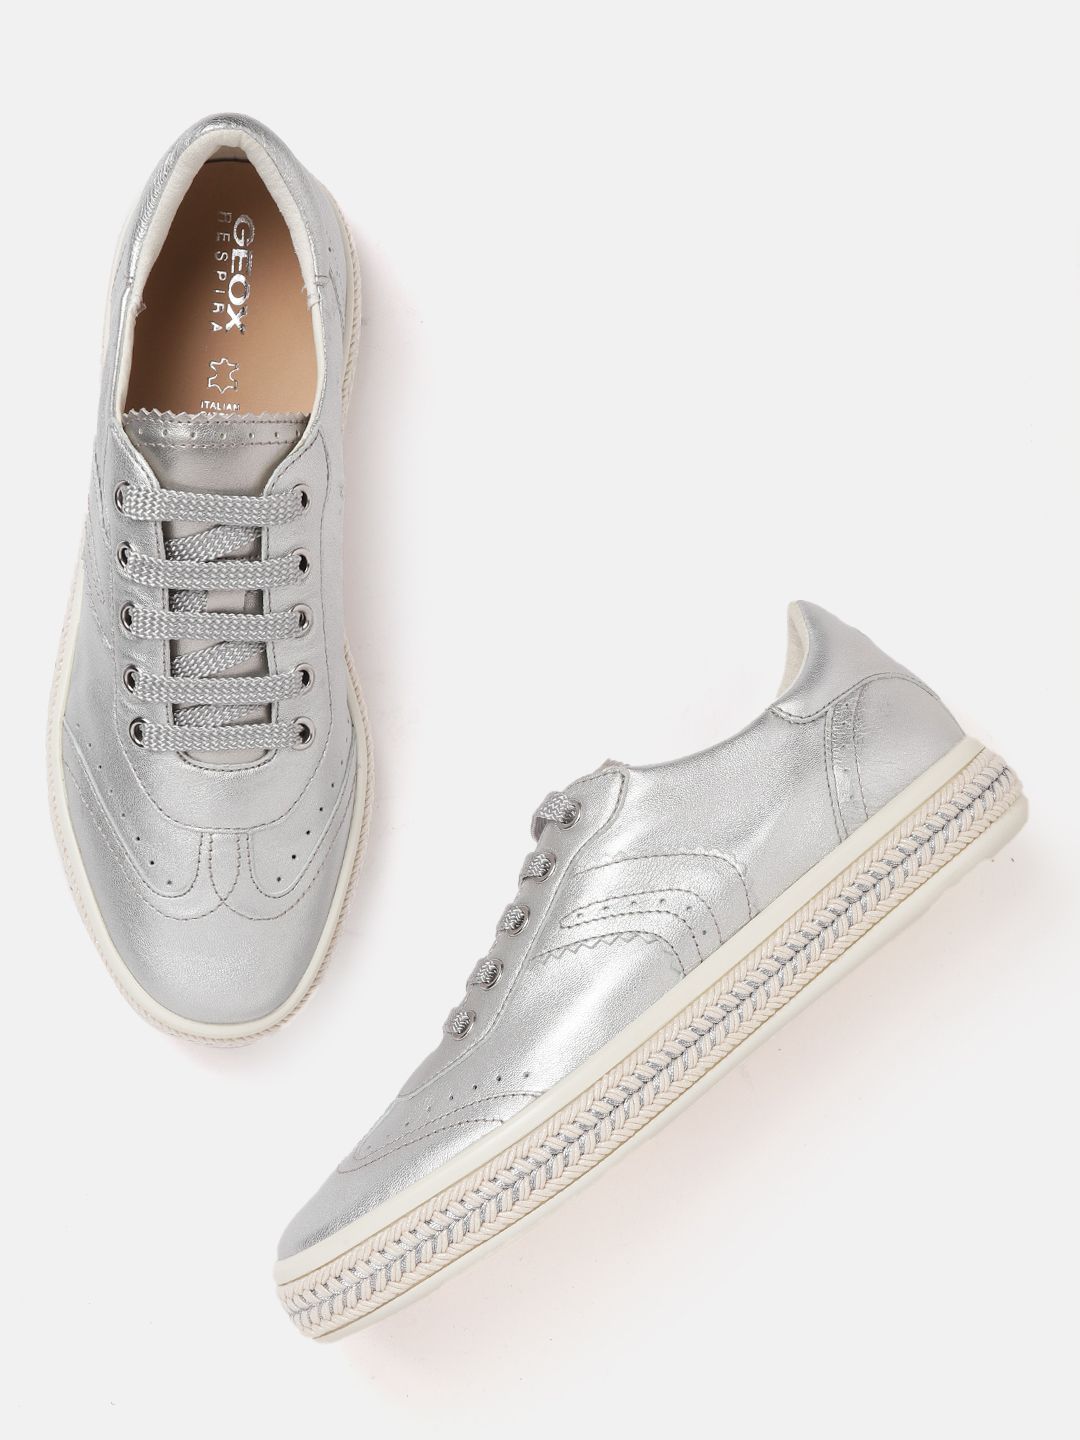 Geox Women Silver-Toned Leather Sneakers Price in India